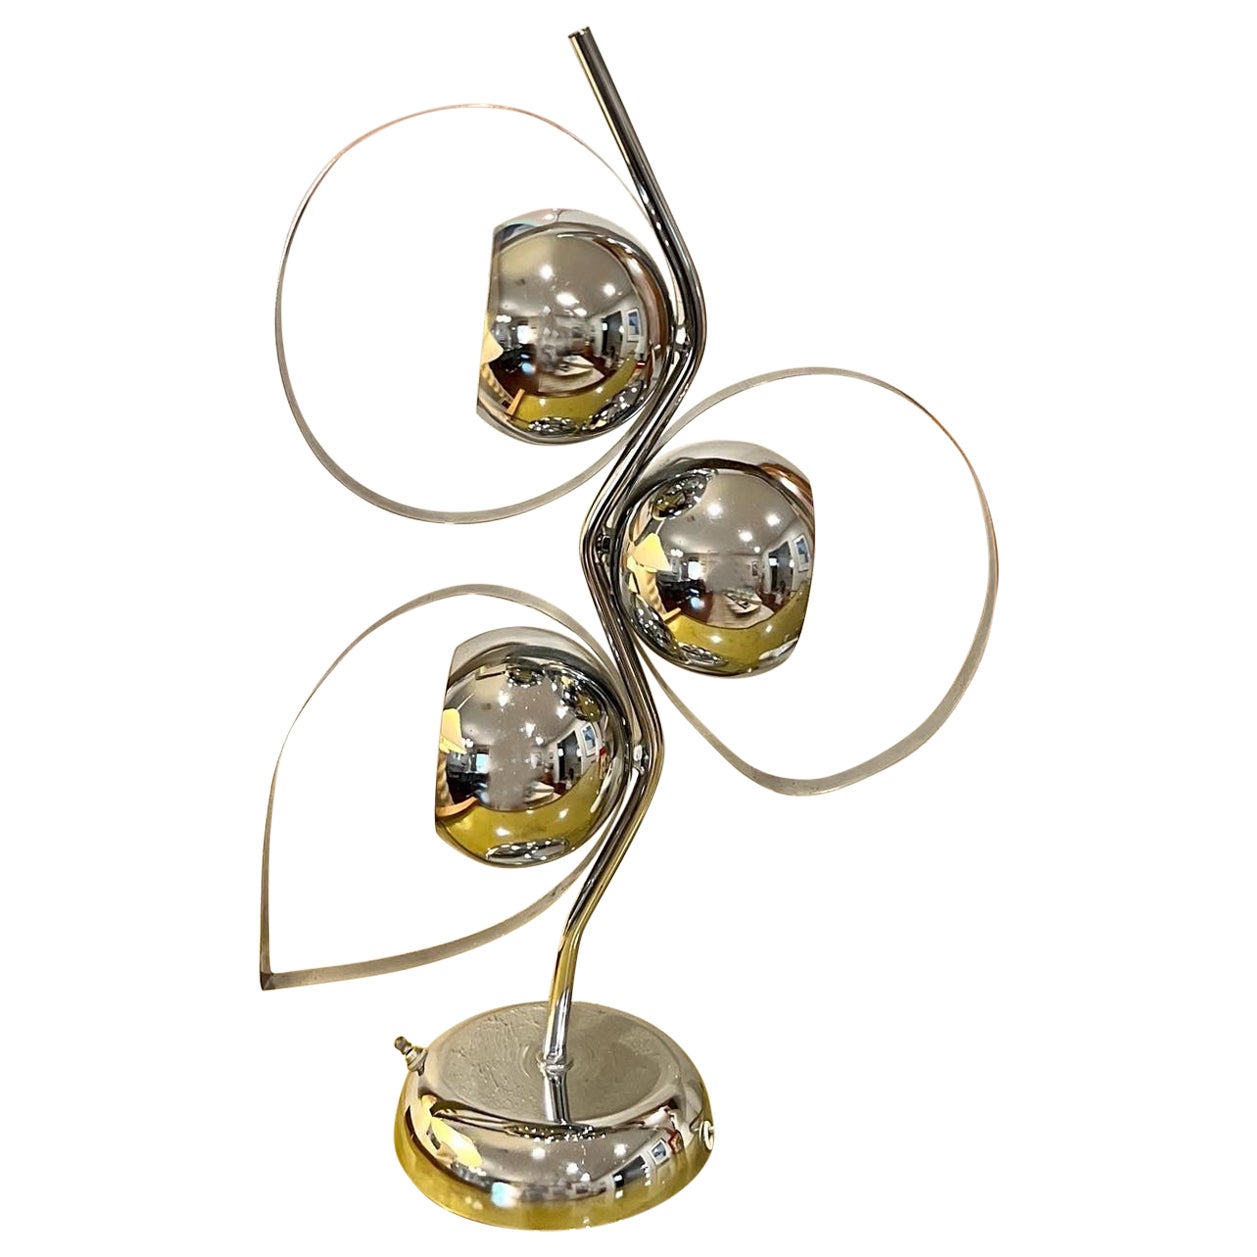 Iconic Mid-Century Modern Chrome Orb Space Age Waterfall Table Lamp